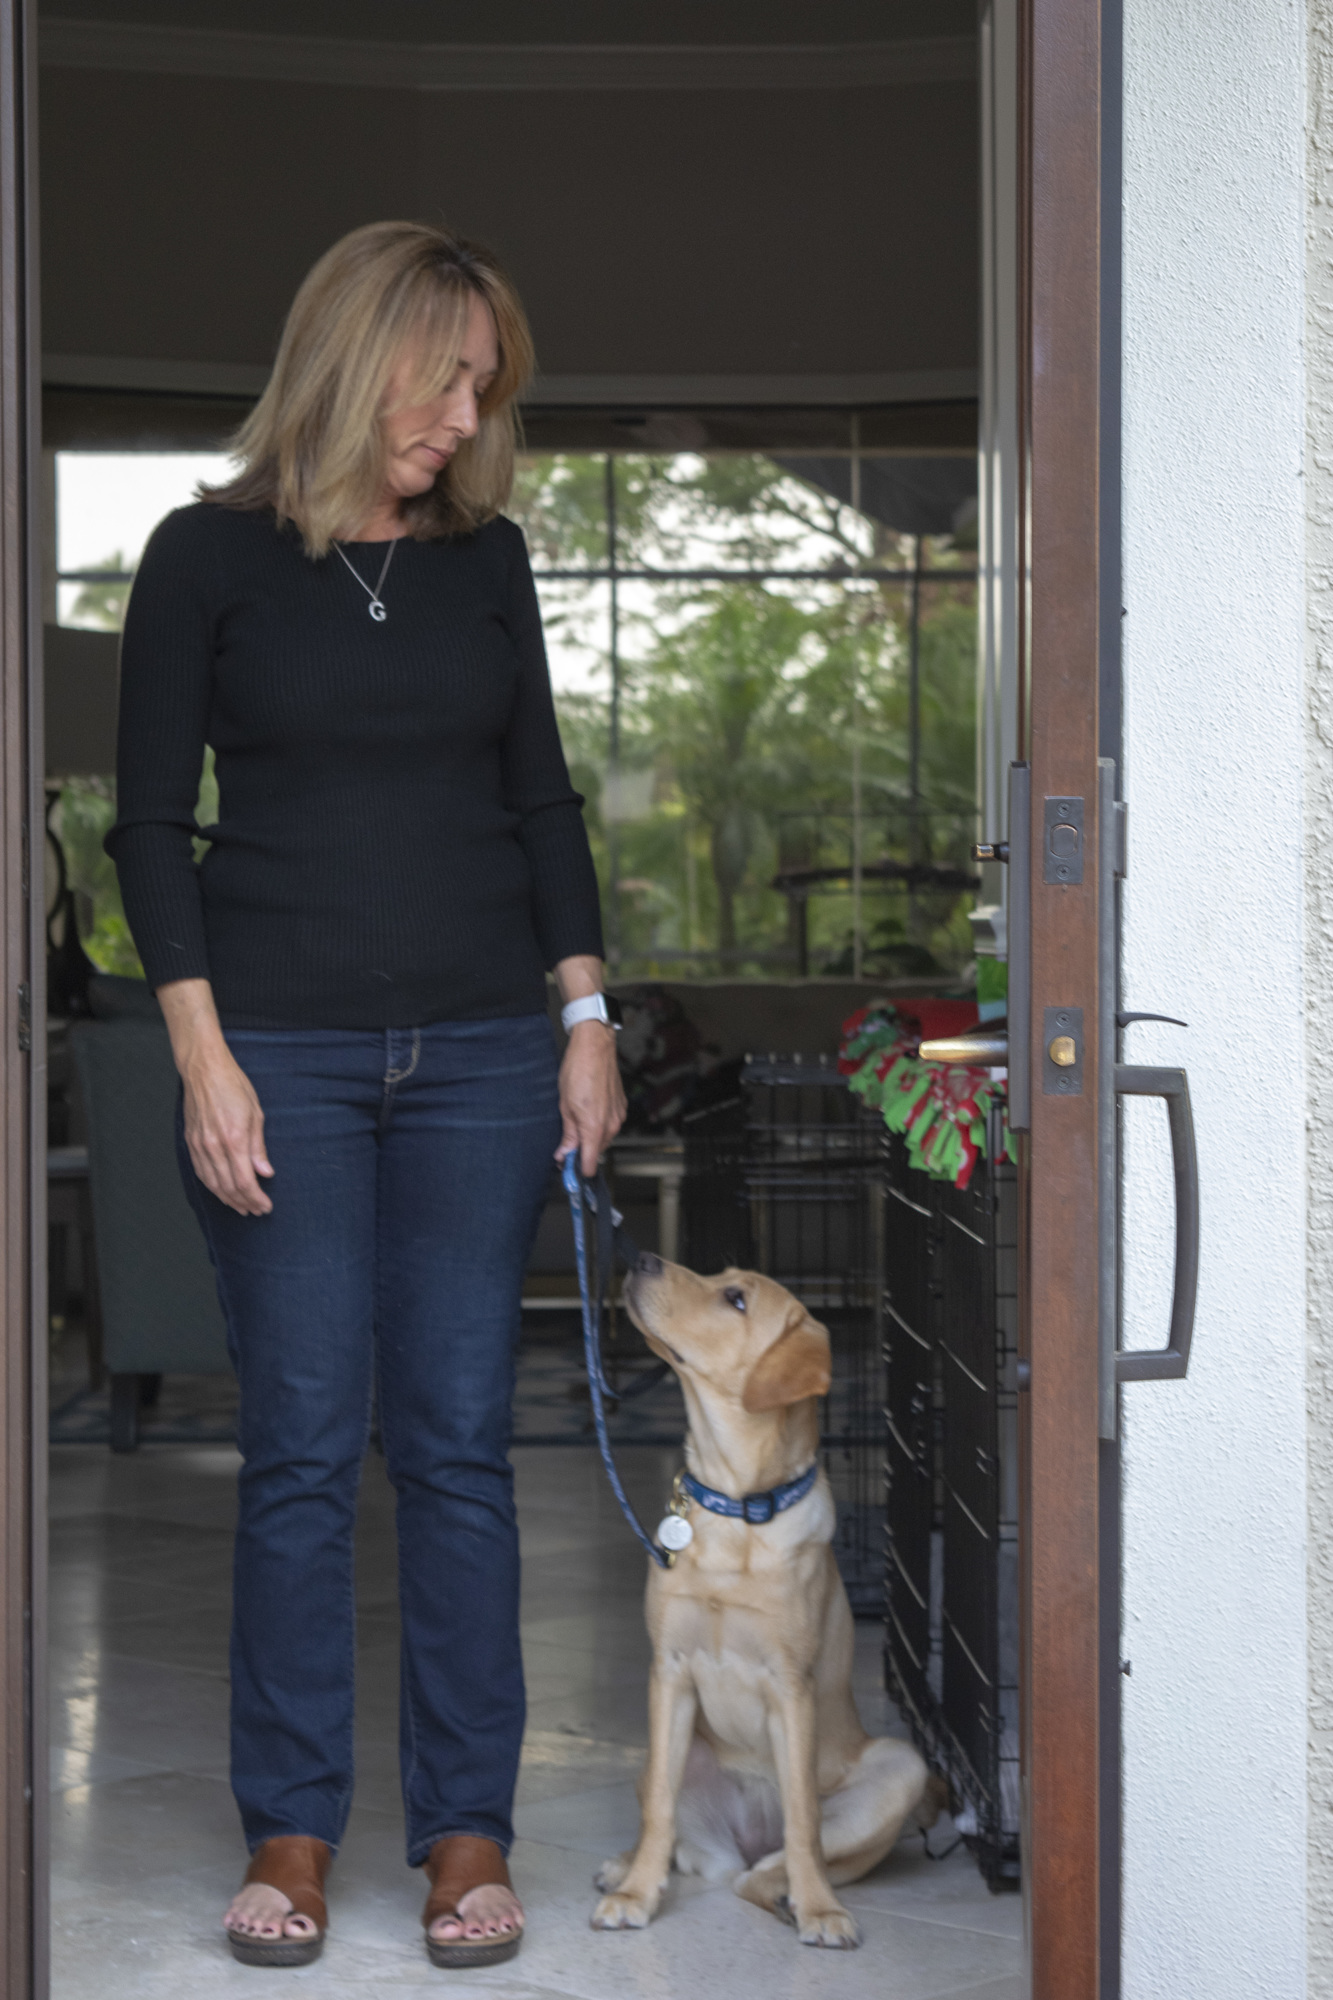 Gina Hagopian and guide dog pup in training Liberty. Raisers teach pups basic commands, such as how to sit before walking through any door.